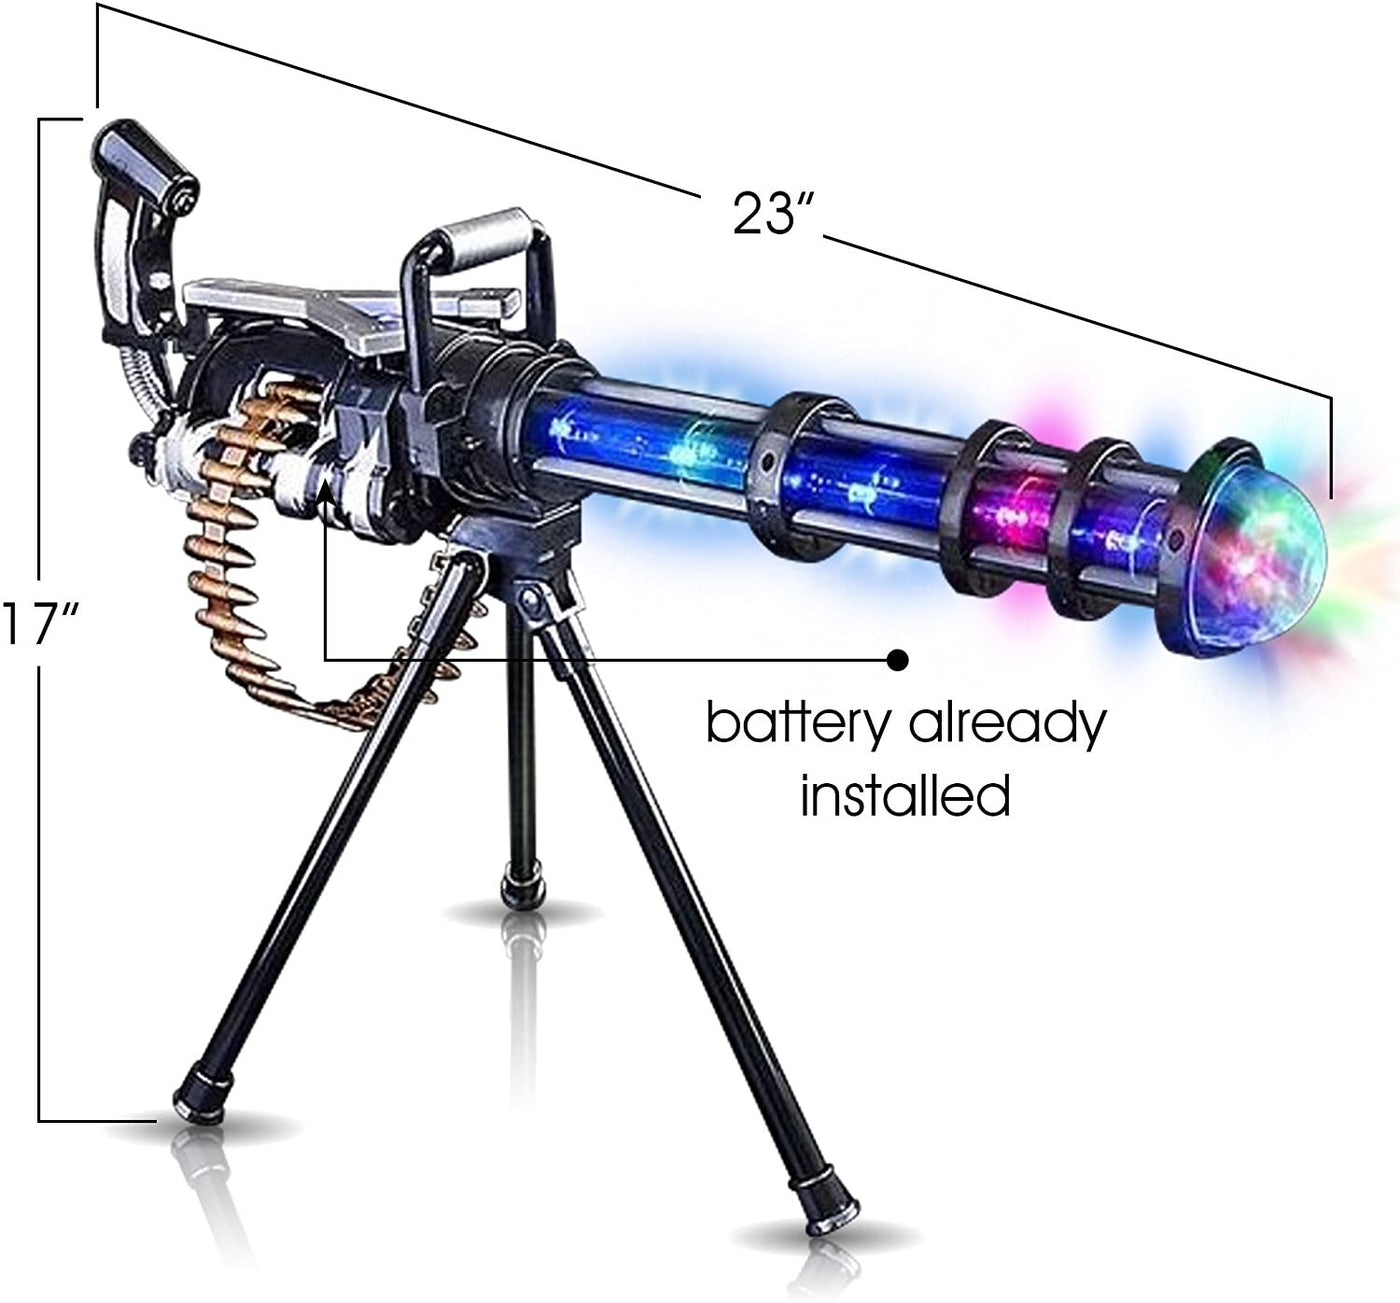 Light Up Rotary Machine Toy Gun with Tripod Stand Rotating Barrel, LED and Sound Effects - 23" Pretend Play Military Rifle - Batteries Included - Great Gift for Boys and Girls